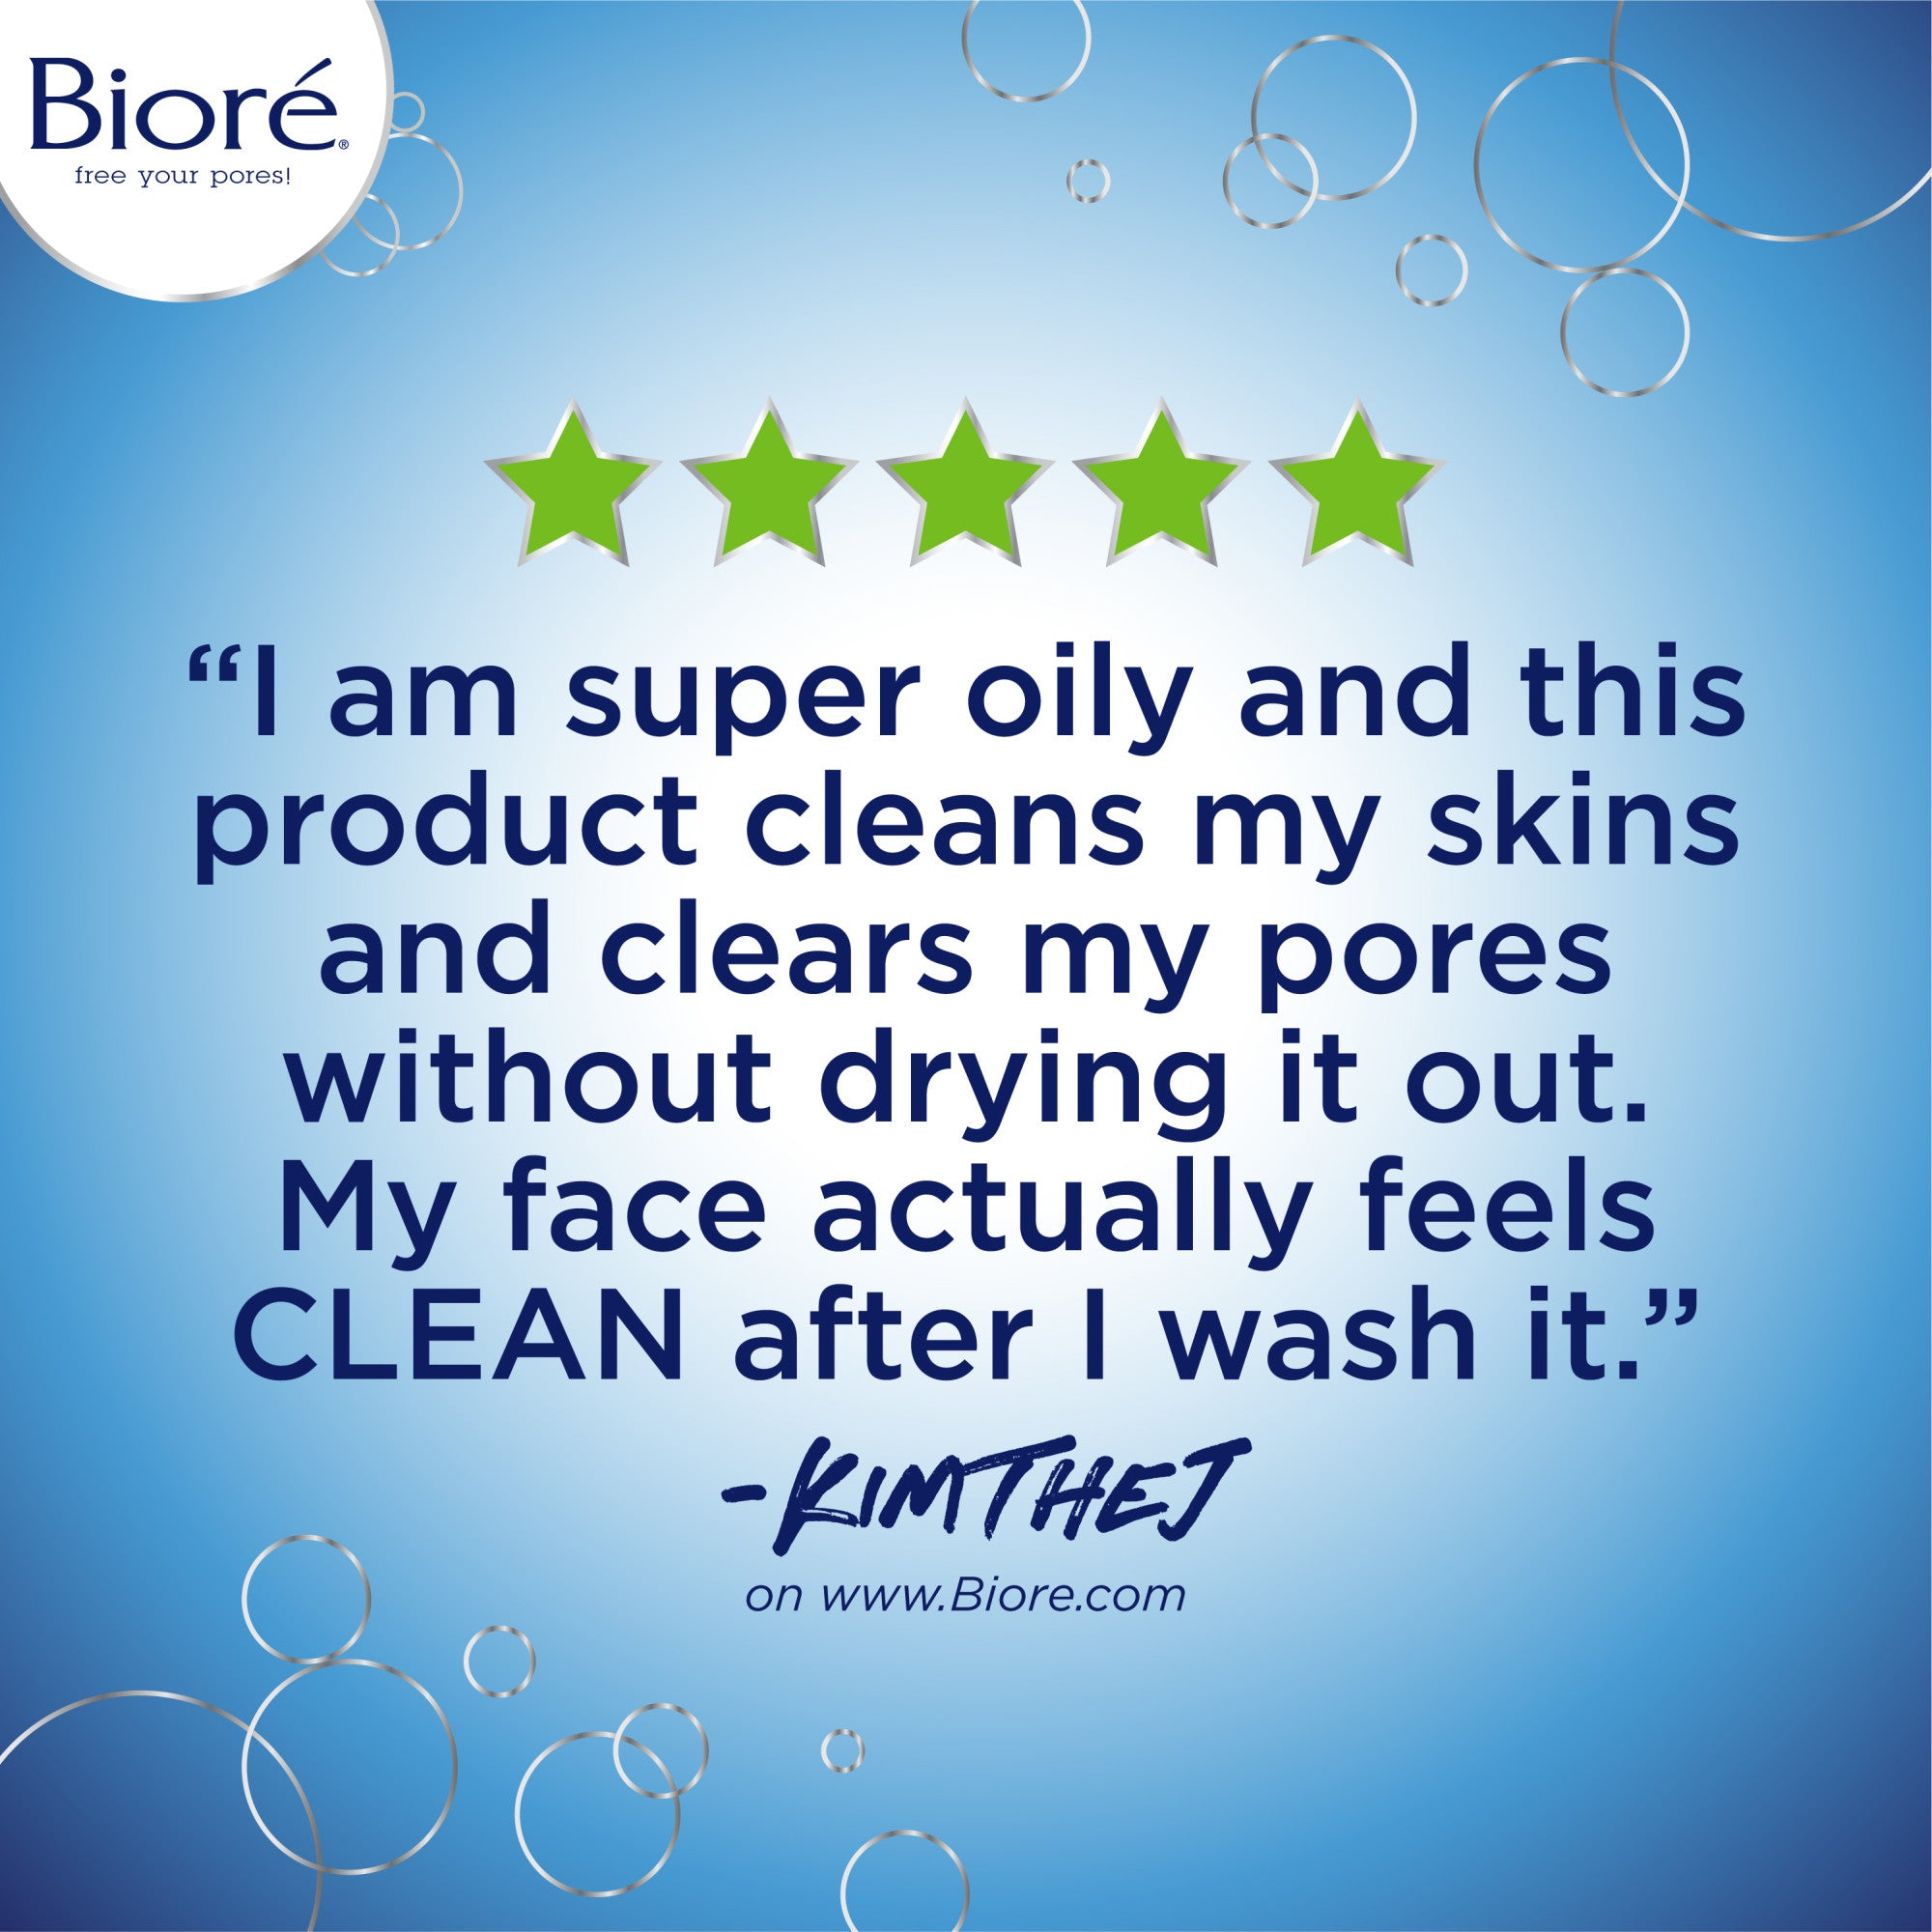 5 Star review: "I am super oil and this product cleans my skins and clears my pores without drying it out. My face actually feels CLEAN after I was it." KIMTHEJ on www.biore.com